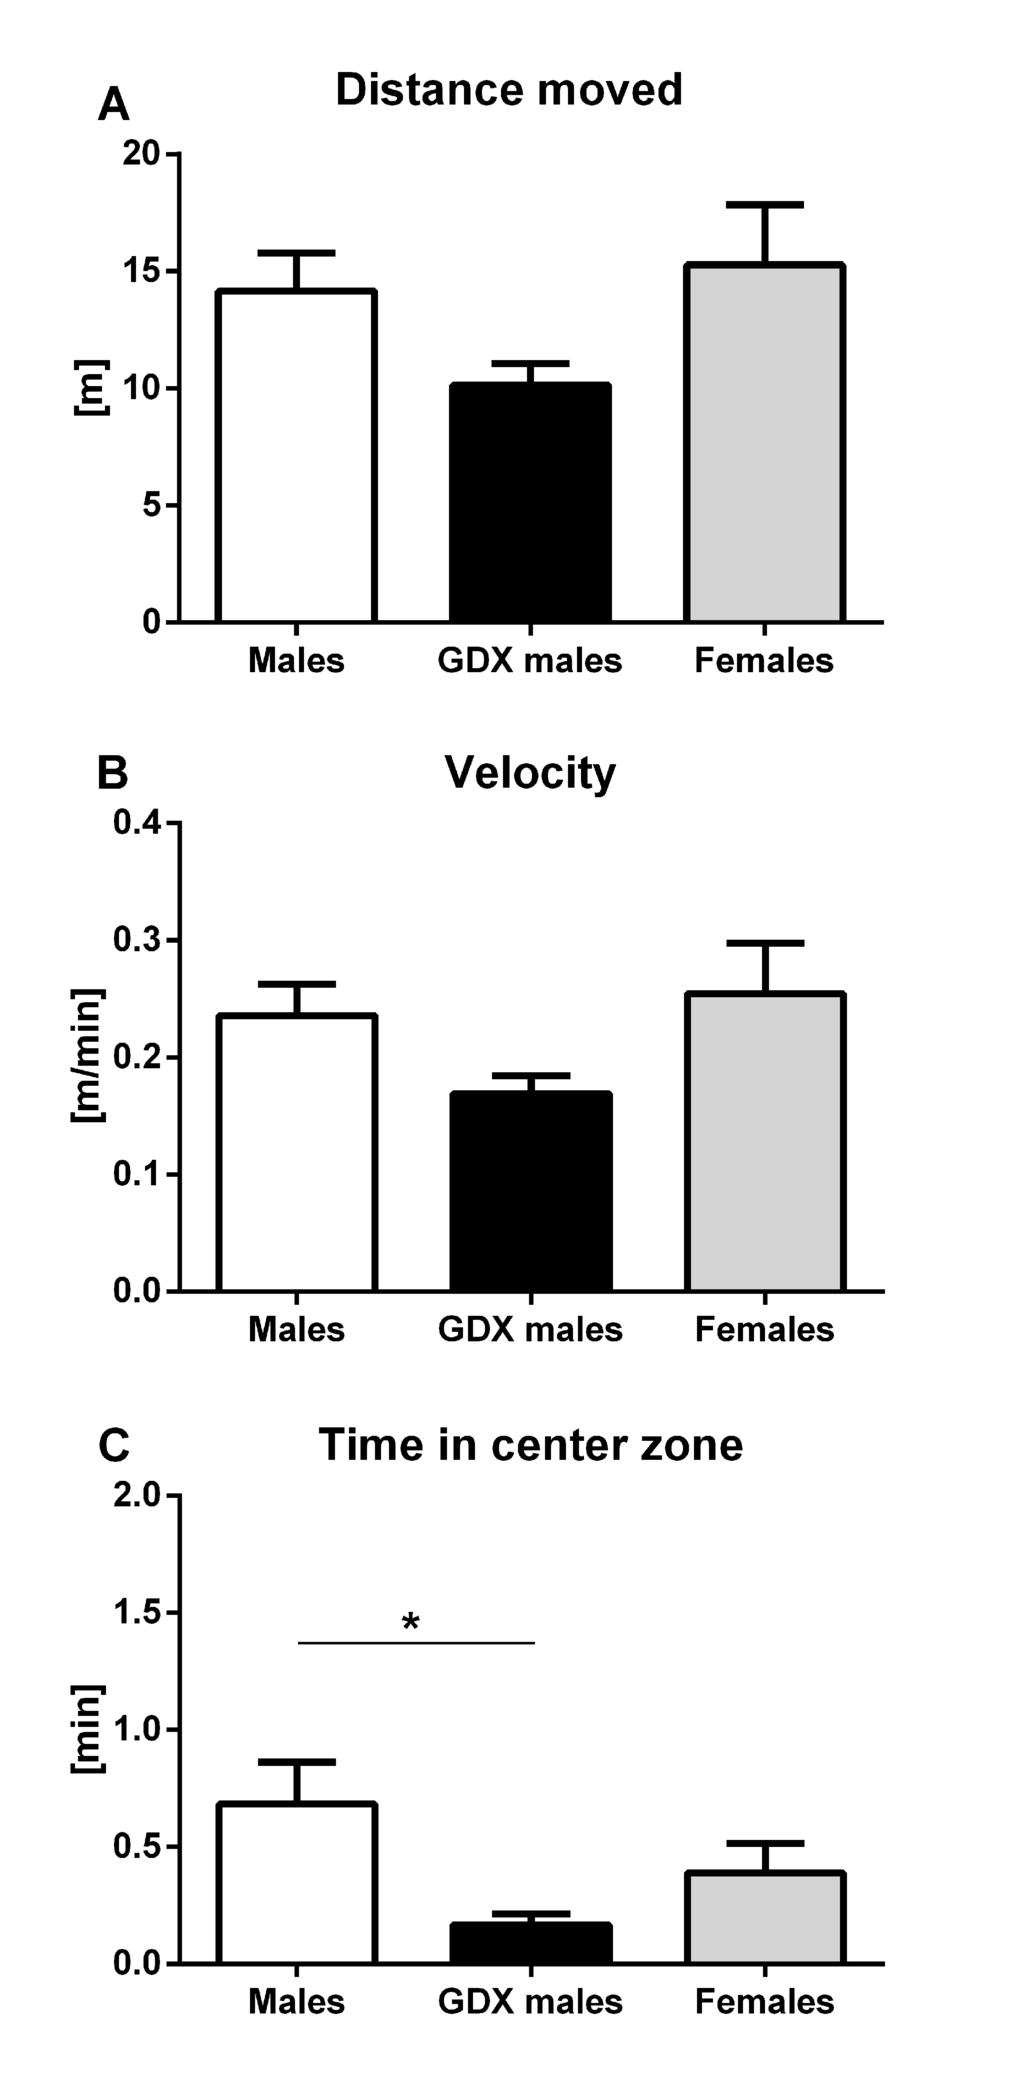 Locomotor activity and anxiety-like behavior of aged rats in instrumented observation cage. (A, B) No significant differences between the groups were found in locomotor activity. (C) GDX males spent significantly less time in the center zone than males. Males (white bar), GDX males (black bar) and females (grey bar). Values are expressed as means + SEM. *p